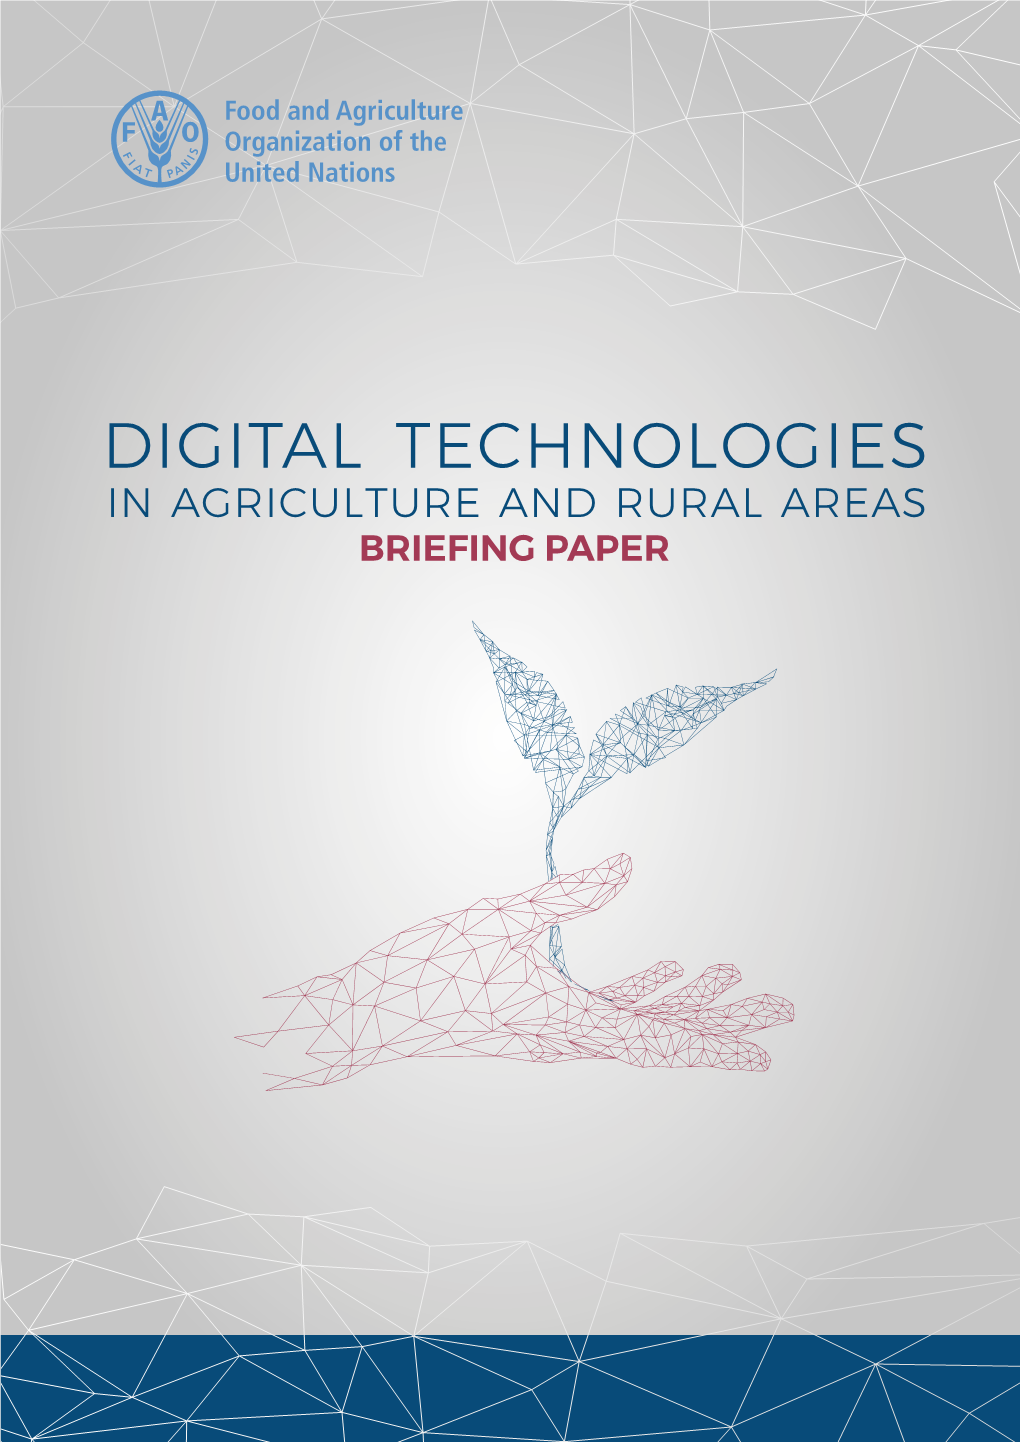 Digital Technologies in Agriculture and Rural Areas Briefing Paper